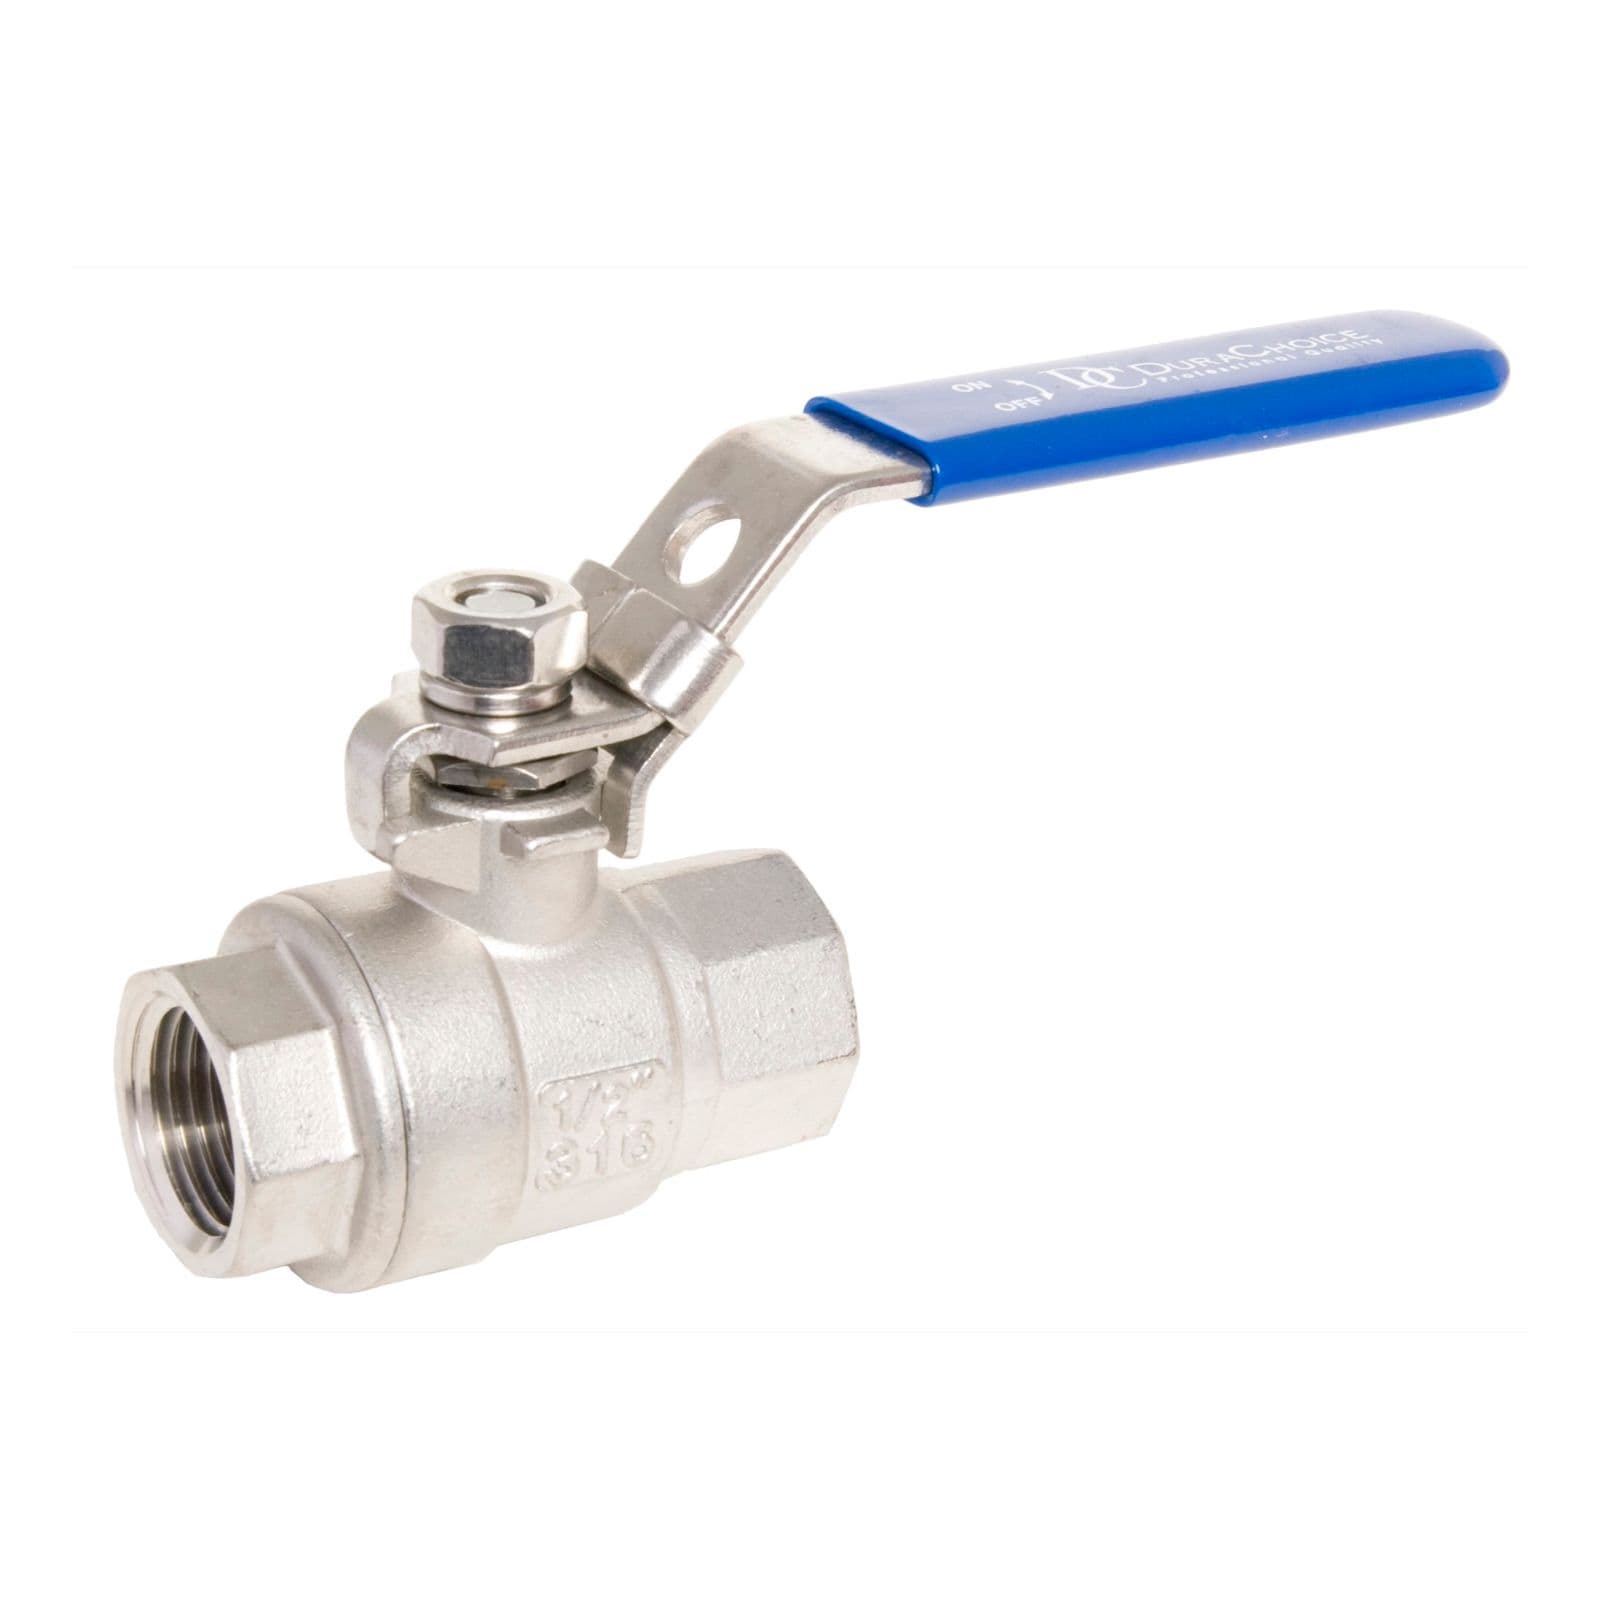 SS316 3 Piece Body ball valve BSP Threaded Ends 1/2" Watermarked 15mm 